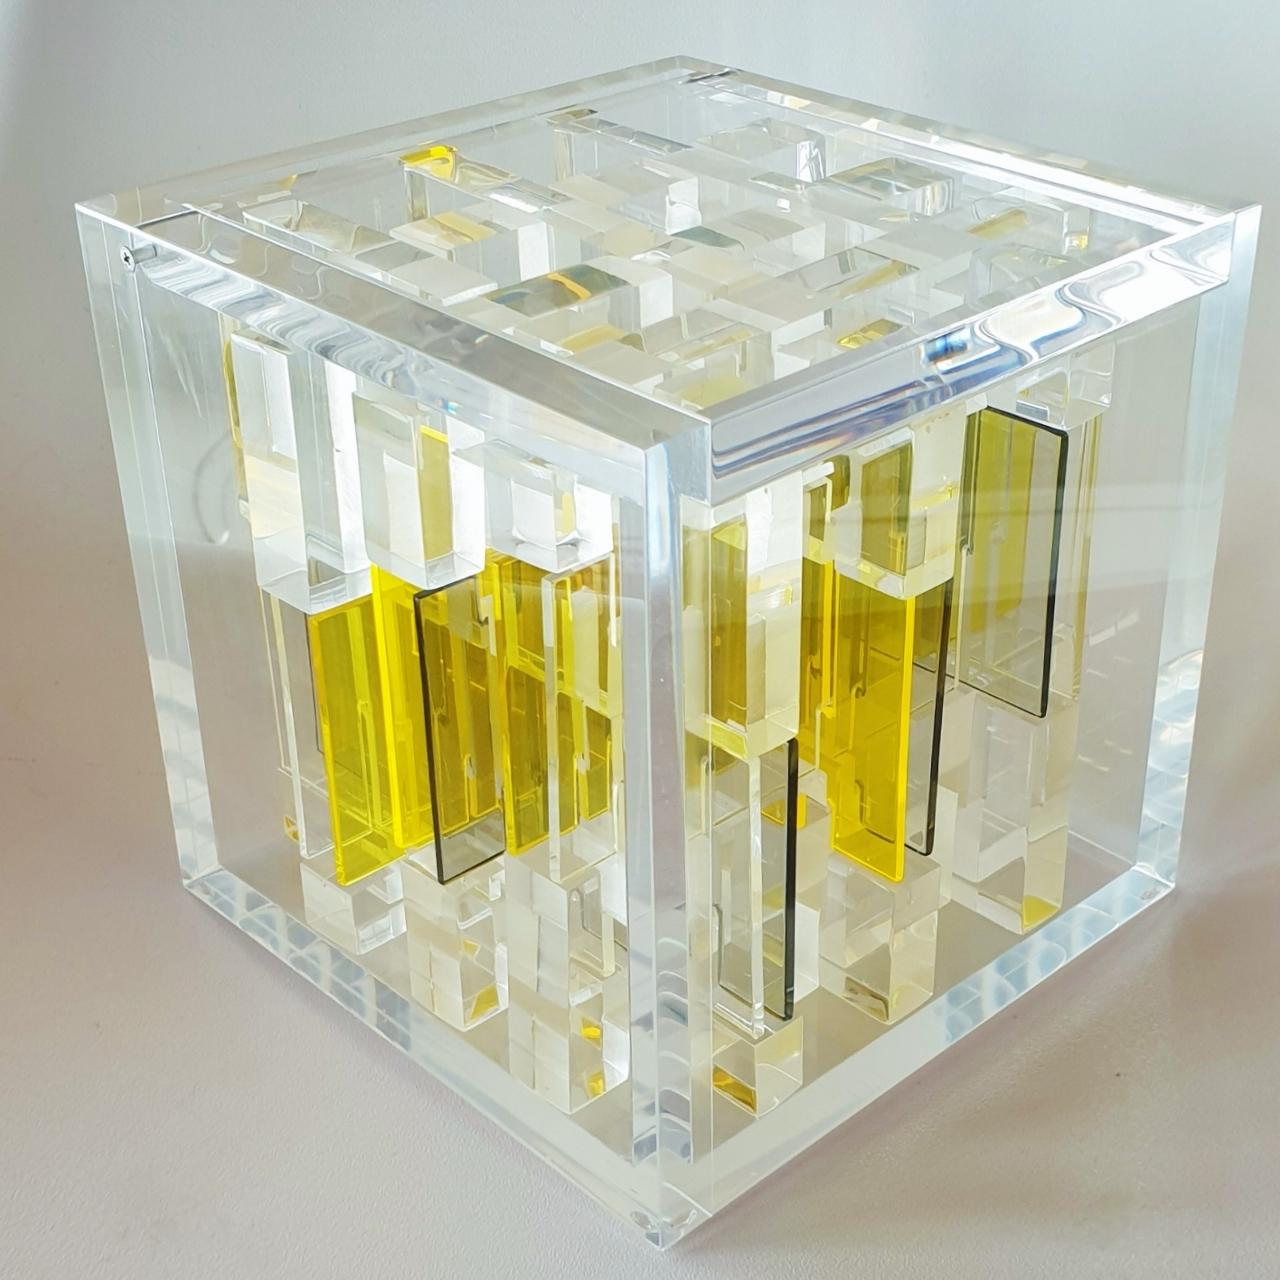 Museum Object is a unique small size contemporary modern cube sculpture by the famous Dutch artist couple Nel Haringa and Fred Olijve. The cube sculpture consists of a few dozen hand cut hand polished plexiglass elements carefully stacked together